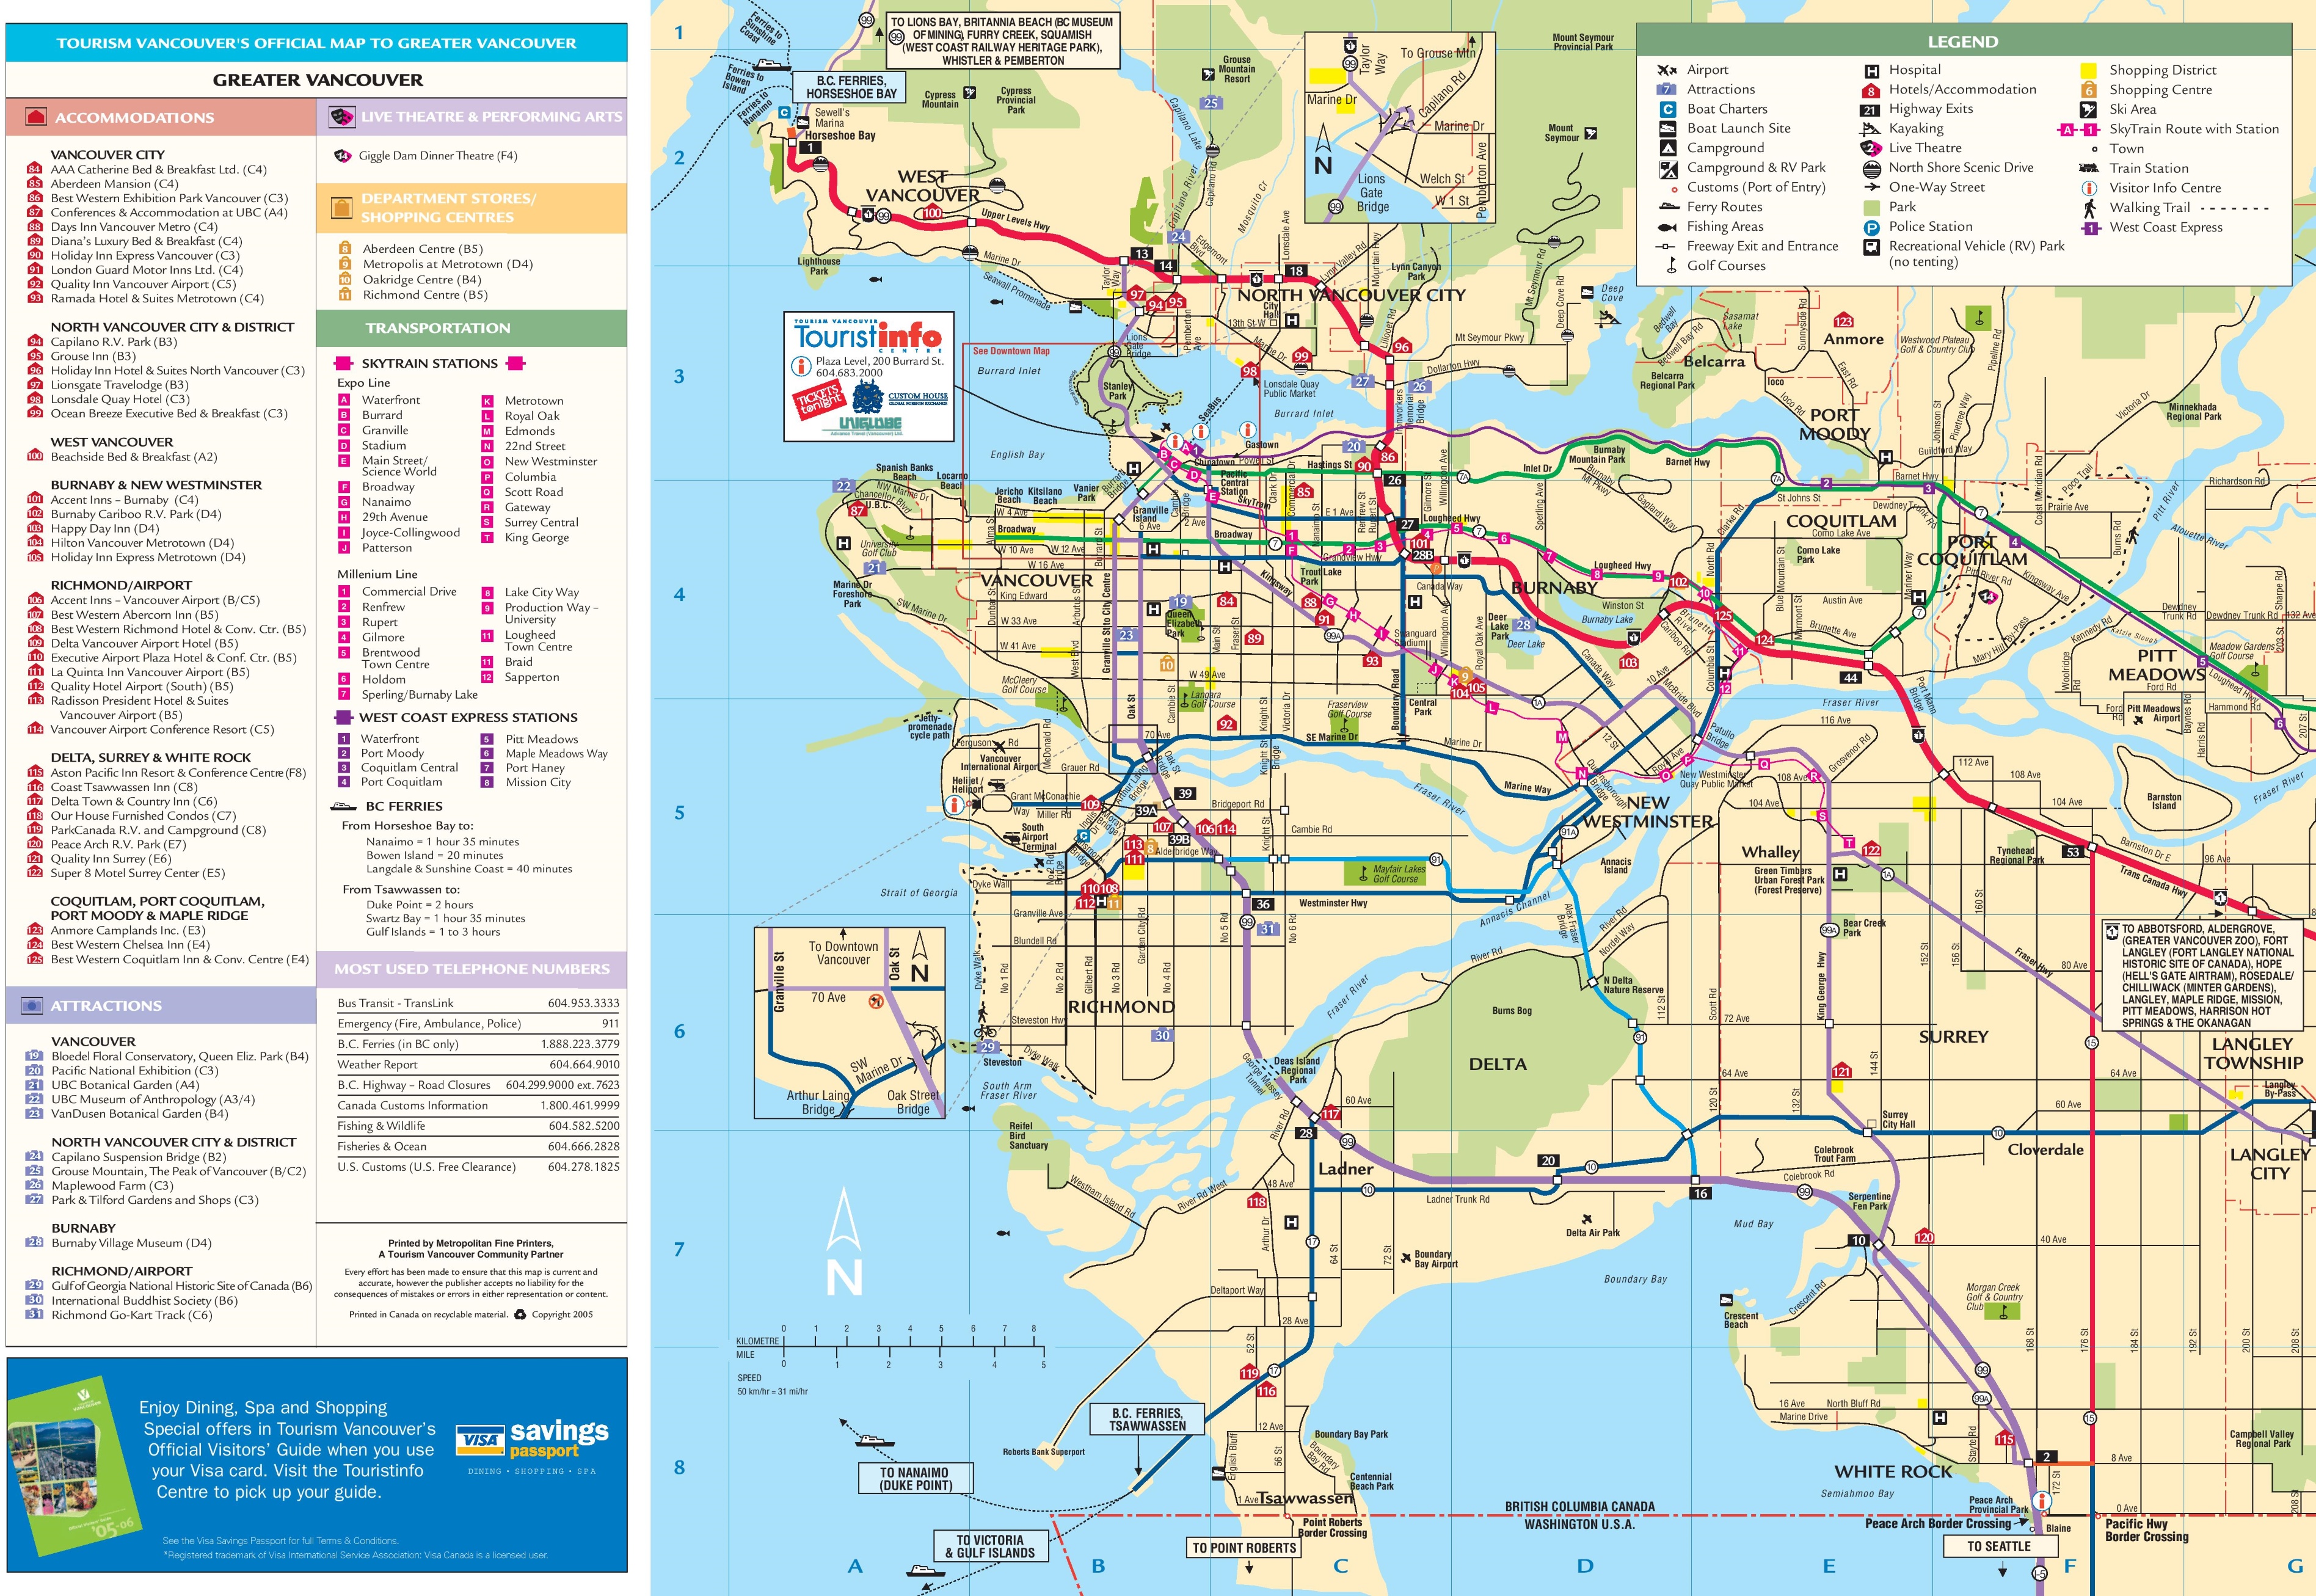 greater-vancouver-tourist-map.jpg